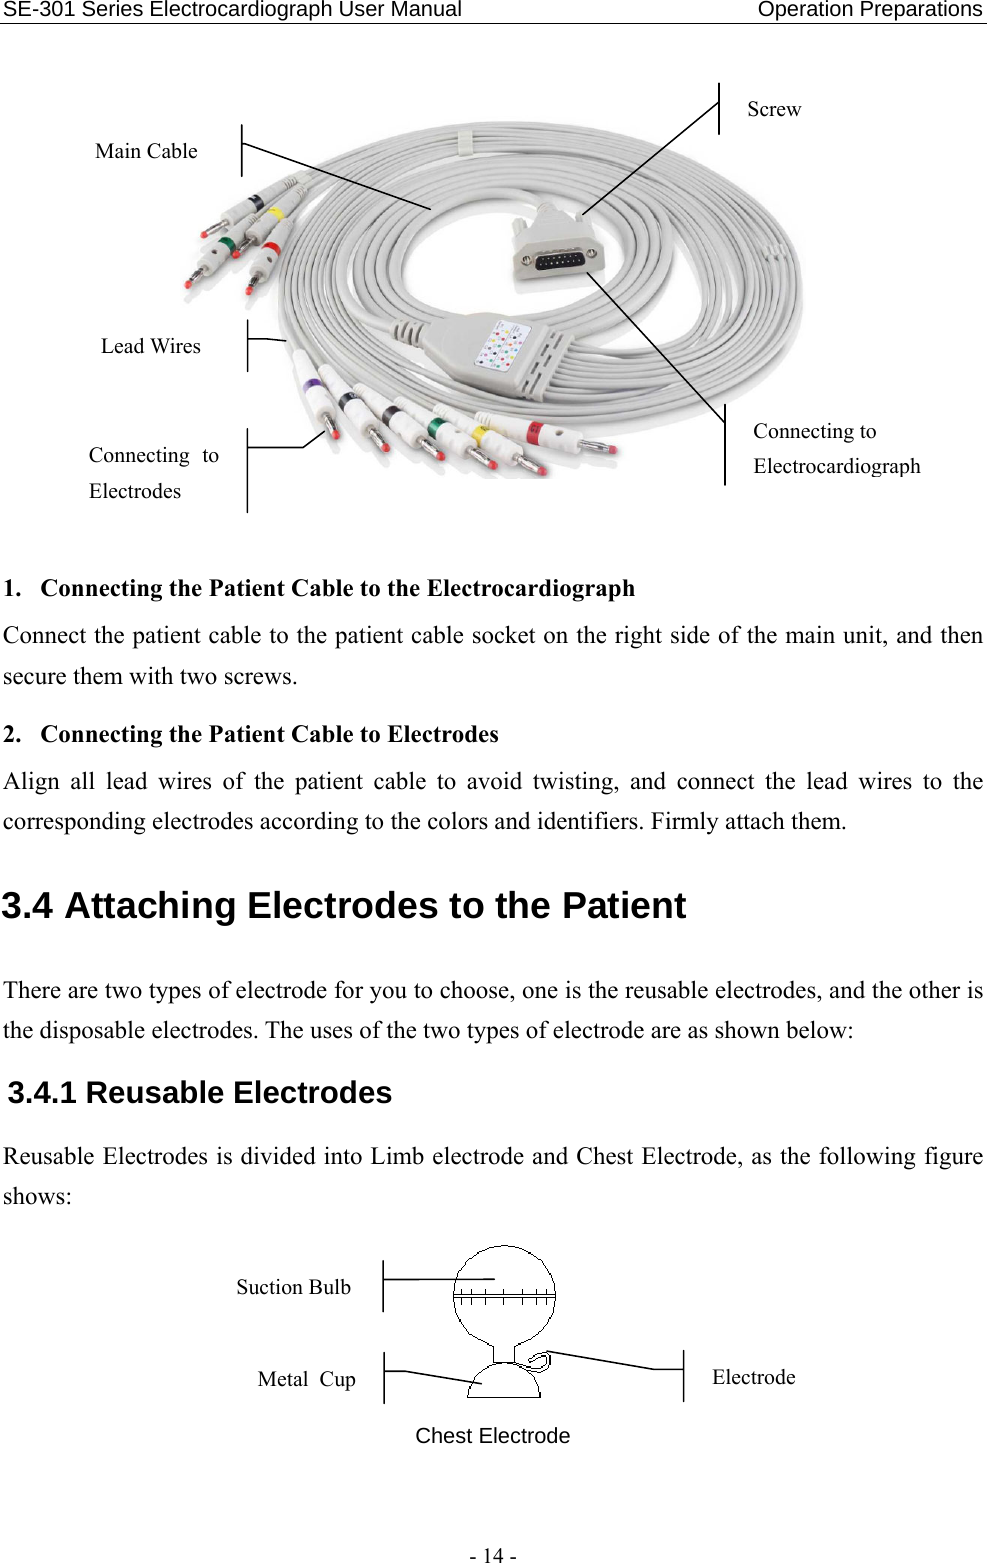 SE-301 Series Electrocardiograph User Manual                           Operation Preparations - 14 -    1. Connecting the Patient Cable to the Electrocardiograph Connect the patient cable to the patient cable socket on the right side of the main unit, and then secure them with two screws. 2. Connecting the Patient Cable to Electrodes Align all lead wires of the patient cable to avoid twisting, and connect the lead wires to the corresponding electrodes according to the colors and identifiers. Firmly attach them. 3.4 Attaching Electrodes to the Patient There are two types of electrode for you to choose, one is the reusable electrodes, and the other is the disposable electrodes. The uses of the two types of electrode are as shown below: 3.4.1 Reusable Electrodes Reusable Electrodes is divided into Limb electrode and Chest Electrode, as the following figure shows:  Chest Electrode Suction Bulb Electrode Metal Cup Connecting to ElectrocardiographScrew Main Cable Connecting to Electrodes Lead Wires 